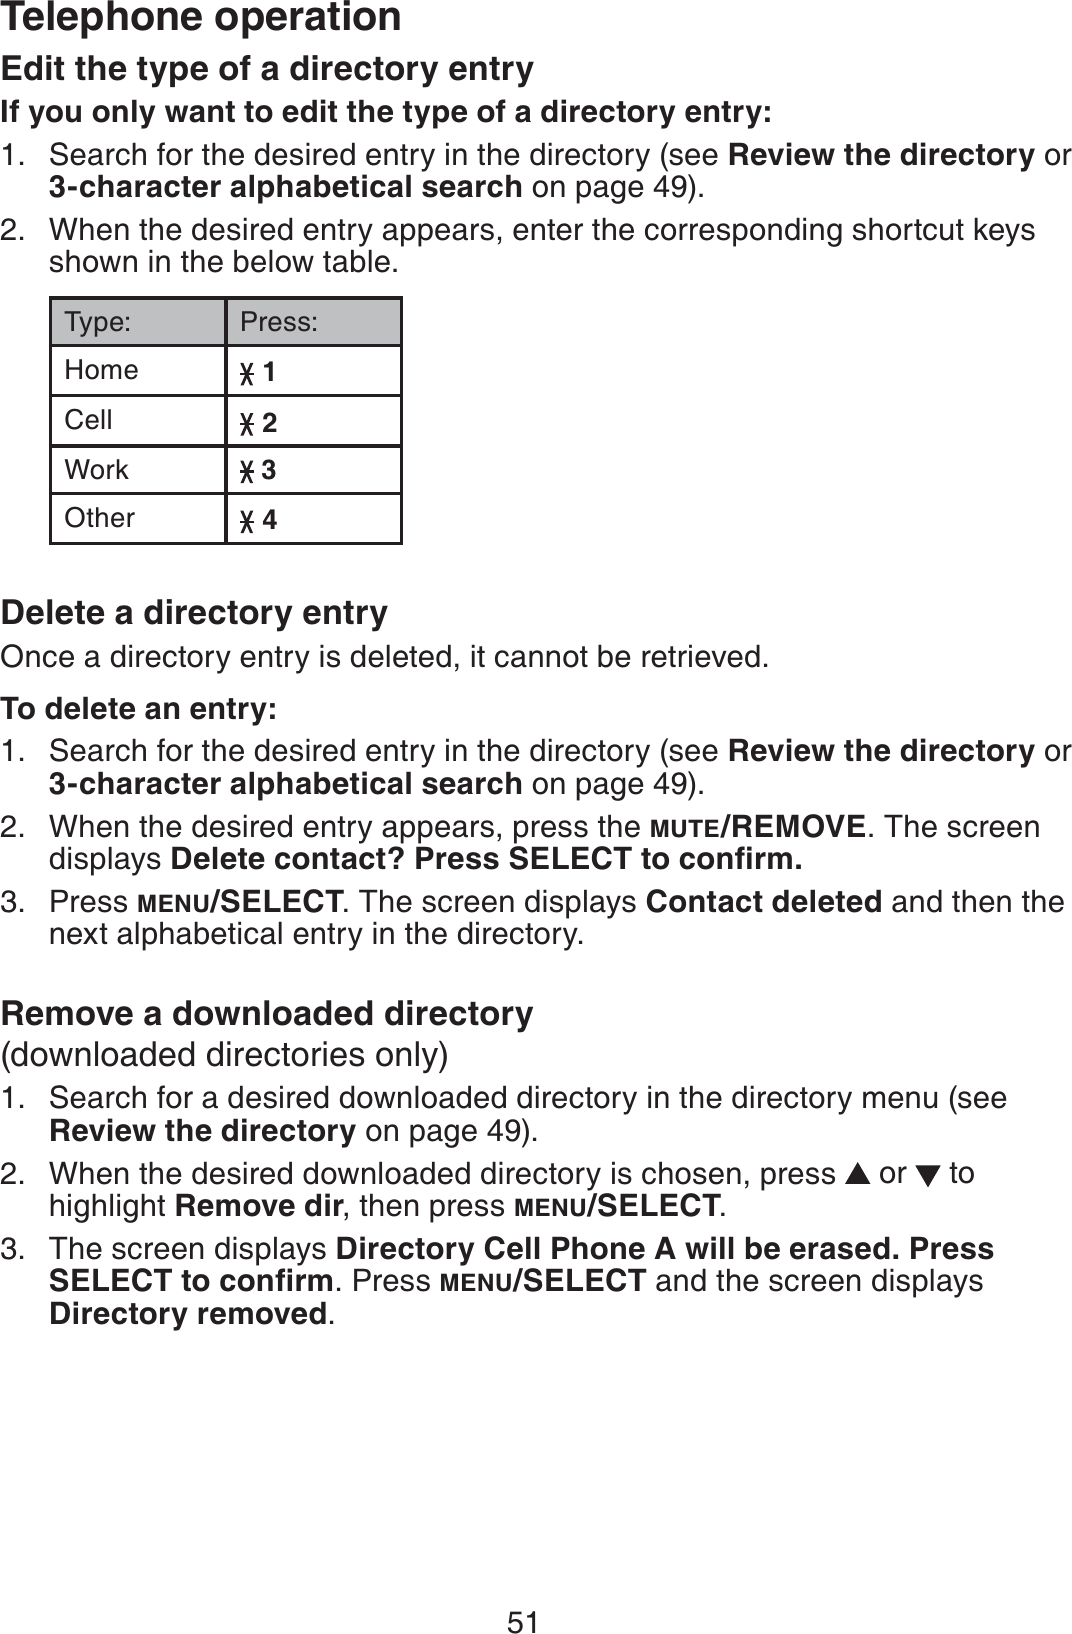 51Telephone operationEdit the type of a directory entryIf you only want to edit the type of a directory entry:Search for the desired entry in the directory (see Review the directory or 3-character alphabetical search on page 49).When the desired entry appears, enter the corresponding shortcut keys shown in the below table.Type: Press:Home 1Cell 2Work  3Other 4Delete a directory entryOnce a directory entry is deleted, it cannot be retrieved.To delete an entry:Search for the desired entry in the directory (see Review the directory or 3-character alphabetical search on page 49).When the desired entry appears, press the MUTE/REMOVE. The screen displays &amp;GNGVGEQPVCEV!2TGUU5&apos;.&apos;%6VQEQPſTOPress MENU/SELECT. The screen displays Contact deleted and then the next alphabetical entry in the directory.Remove a downloaded directory(downloaded directories only)Search for a desired downloaded directory in the directory menu (see Review the directory on page 49).When the desired downloaded directory is chosen, press  or   to highlight Remove dir, then press MENU/SELECT.The screen displays Directory Cell Phone A will be erased. Press 5&apos;.&apos;%6VQEQPſTO. Press MENU/SELECT and the screen displays Directory removed.1.2.1.2.3.1.2.3.